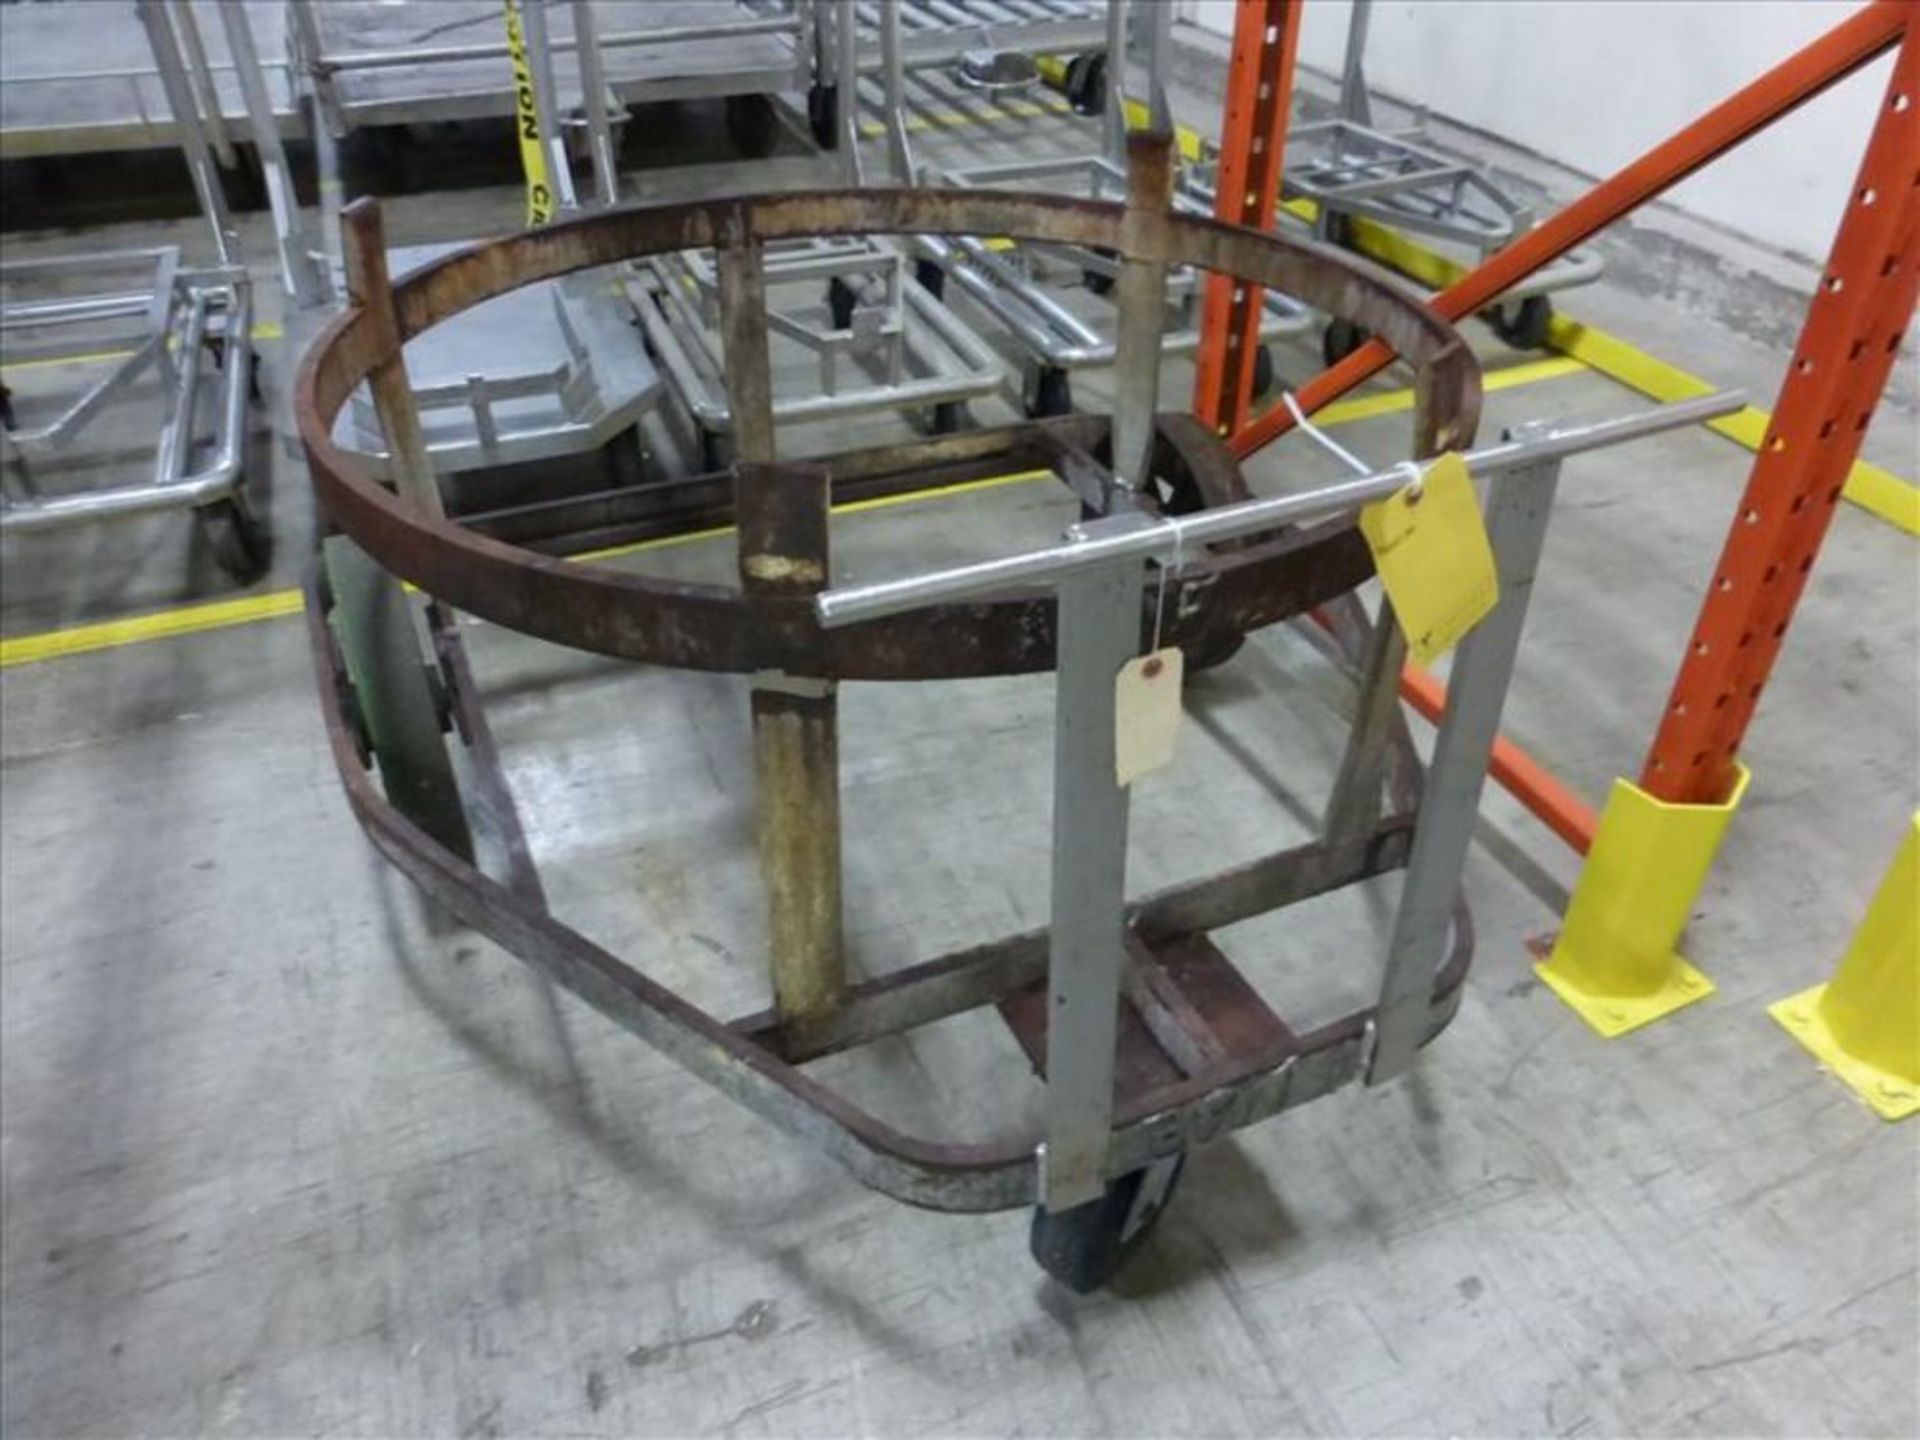 (2) Soup Dolly, (1) Stainless Cart, including tarps, lighting fixtures, steel plates [2nd Flr Cage - Image 6 of 7